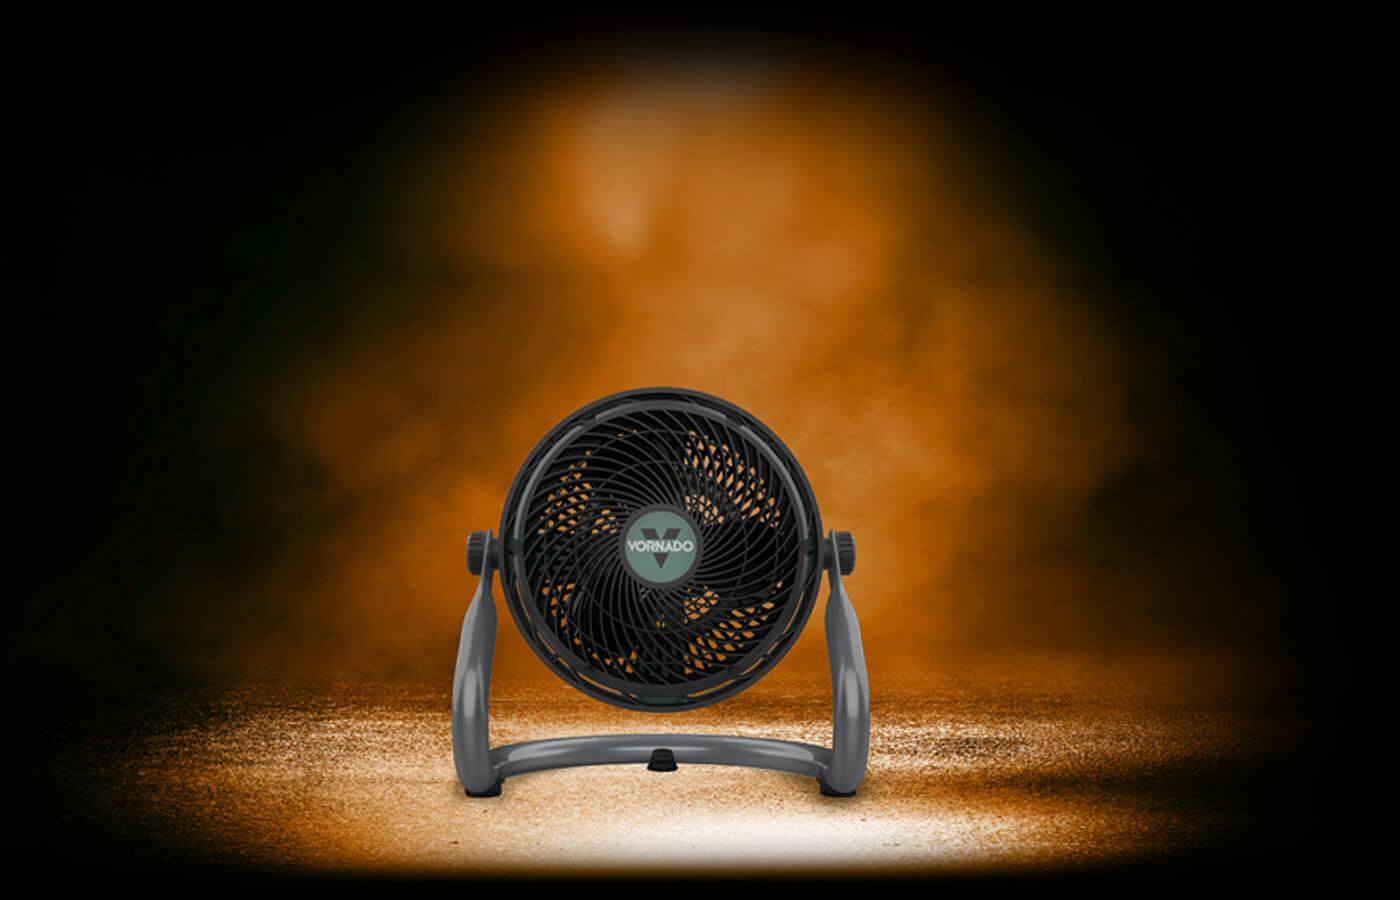 EXO61 HD on dark asphalt. The fan is under an orange light with orange smoke in the background surrounded by darkness